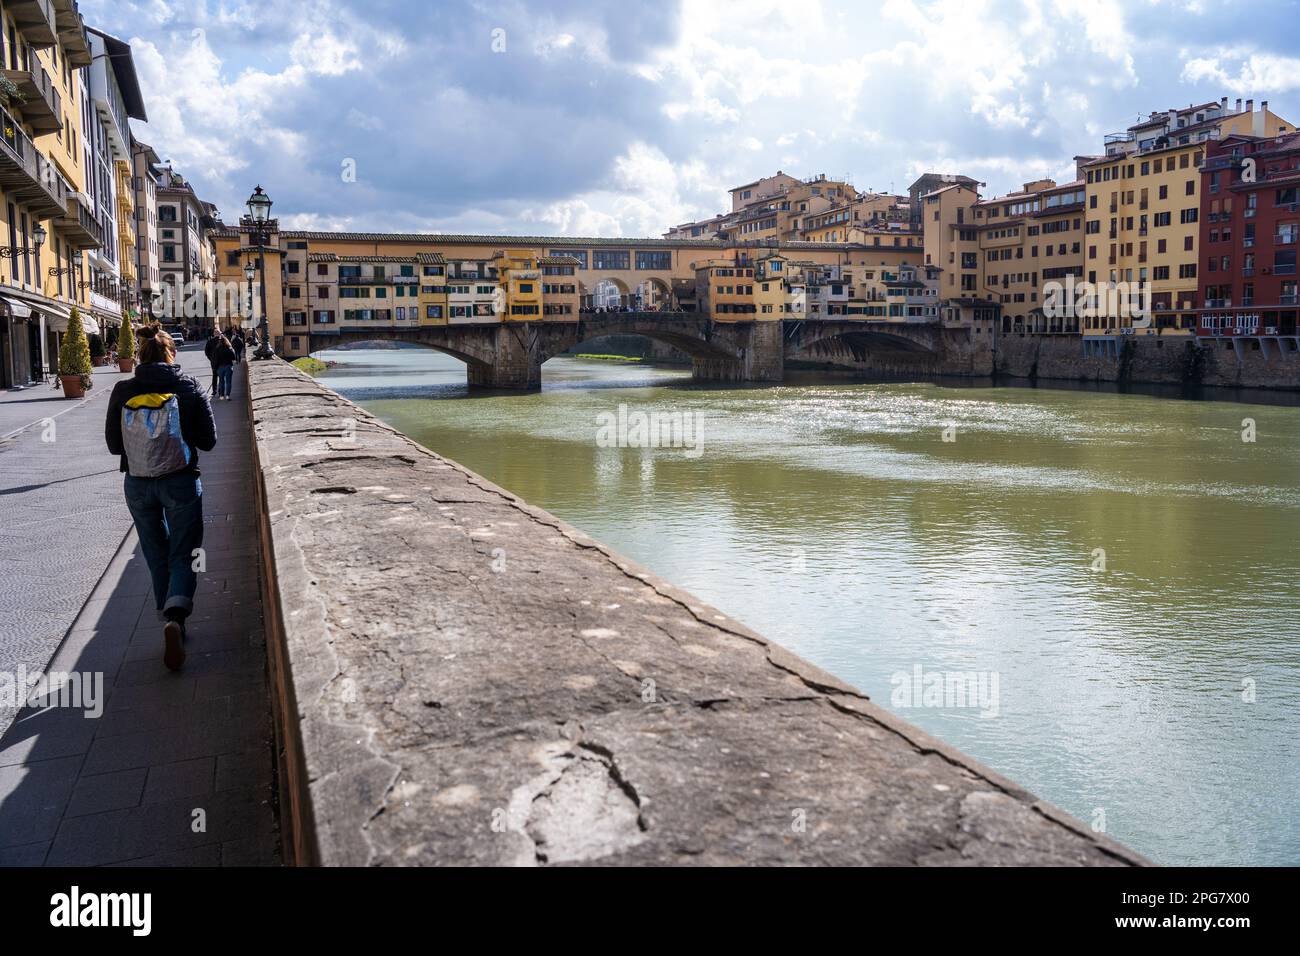 The famous Ponte Vecchio bridge in Florence with the Vasari corridor above the goldsmiths shops Stock Photo